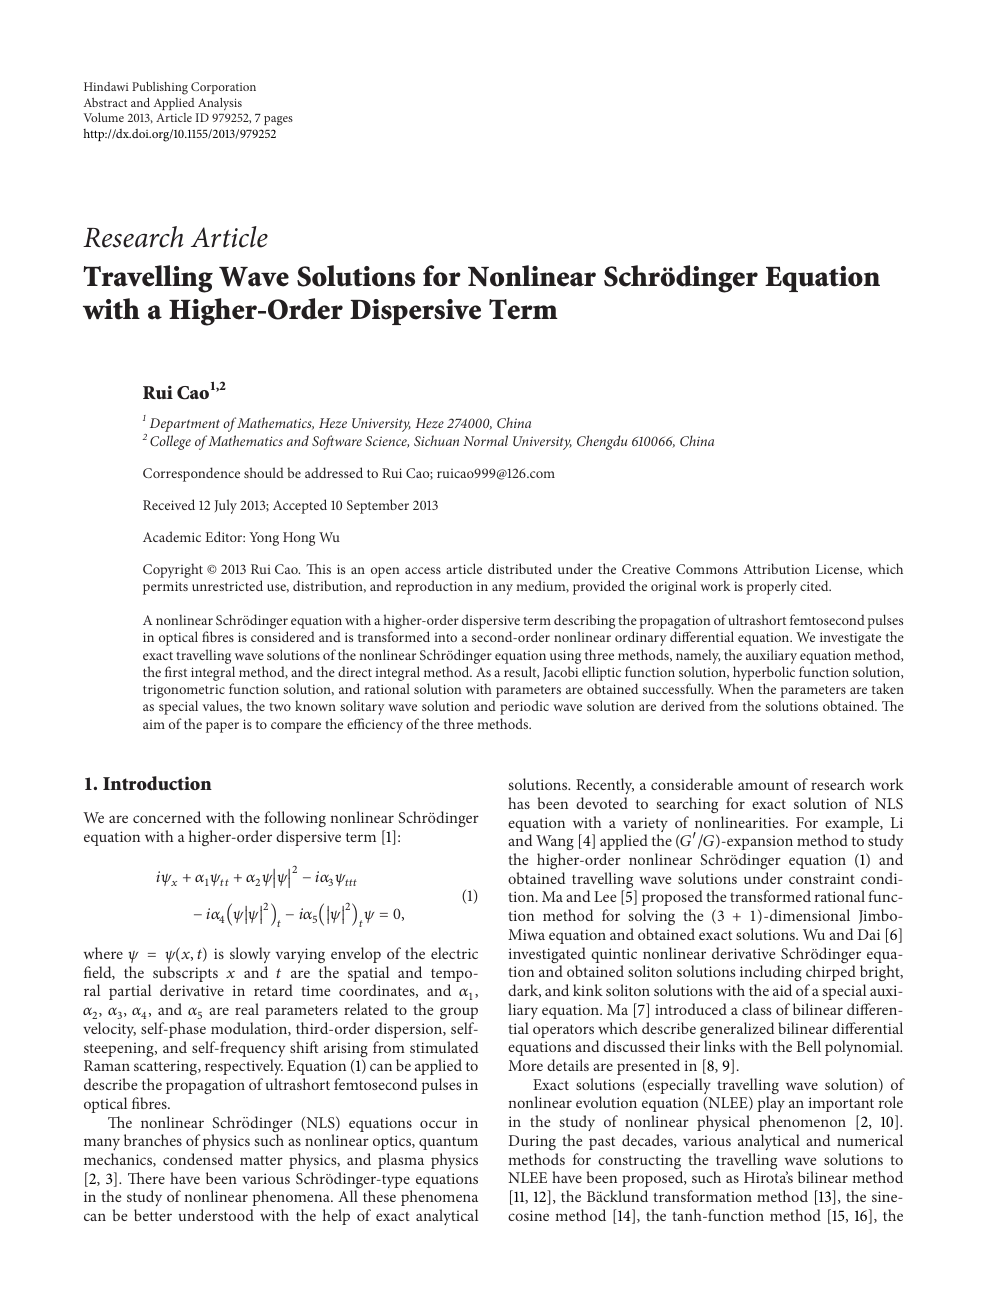 Travelling Wave Solutions For Nonlinear Schrodinger Equation With A Higher Order Dispersive Term Topic Of Research Paper In Mathematics Download Scholarly Article Pdf And Read For Free On Cyberleninka Open Science Hub